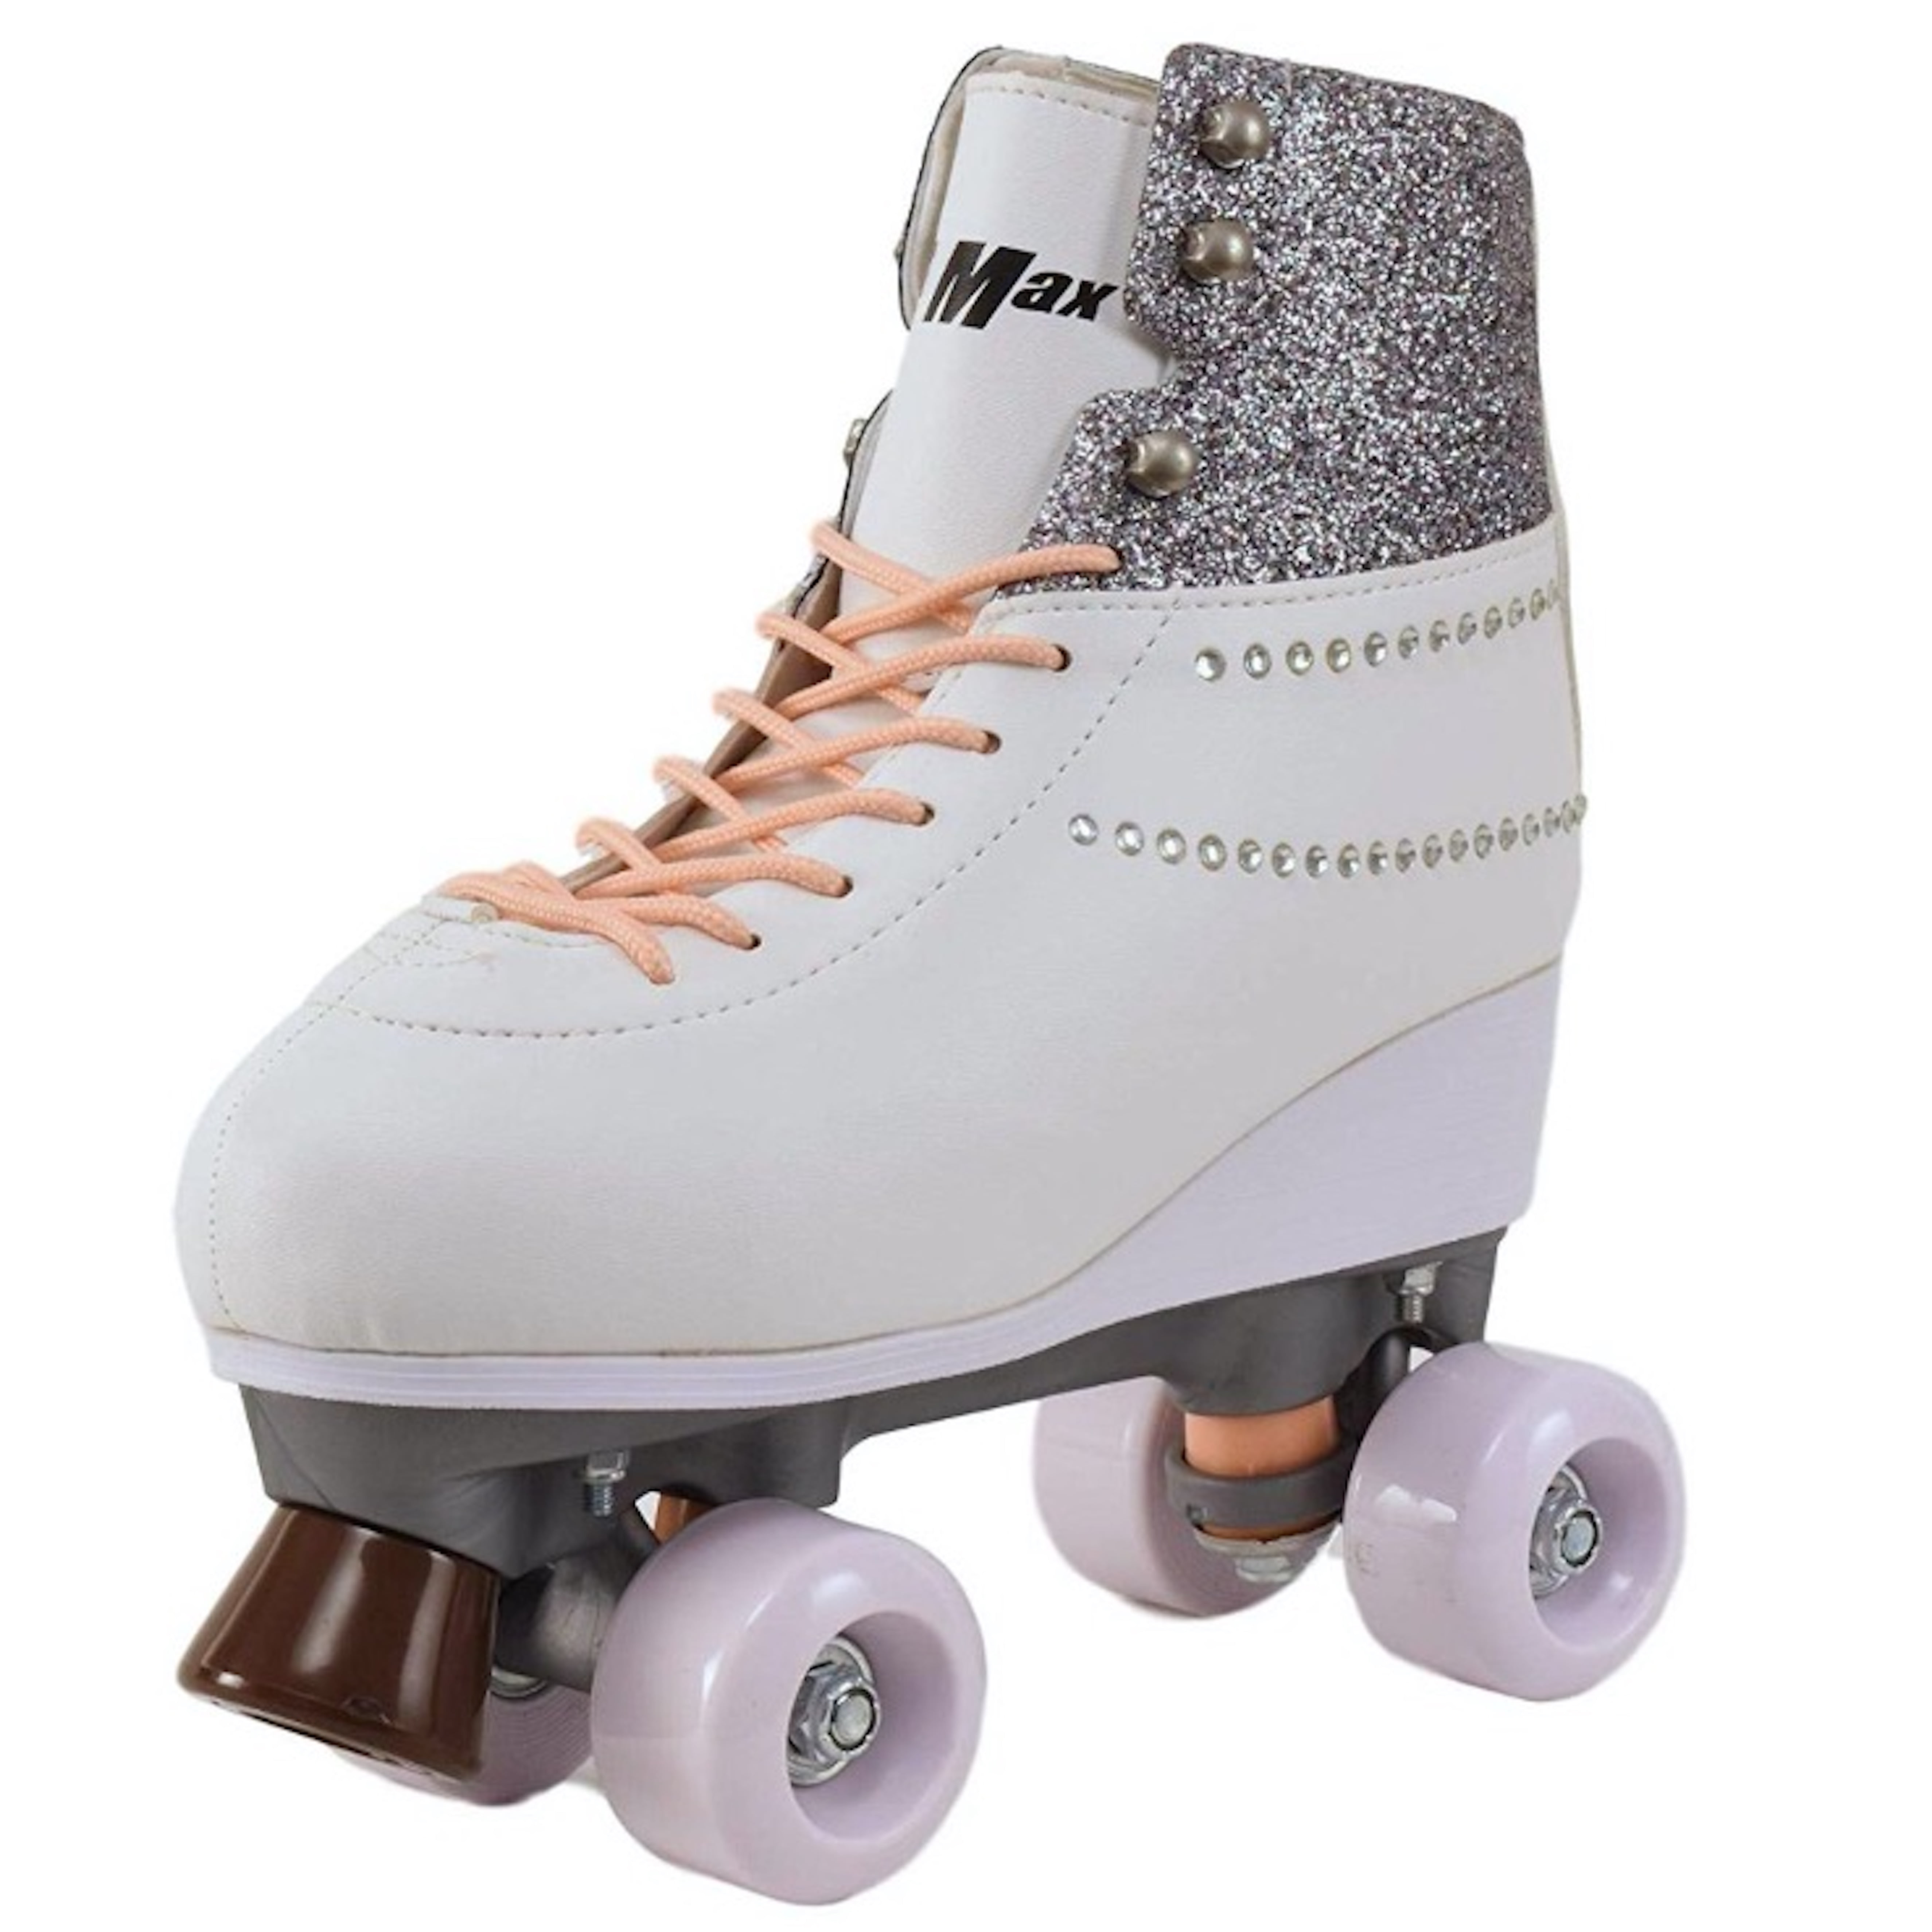 Quad Roller Skates for Girls and Women Size 5 Women Pink Flower Outdoor Derby 